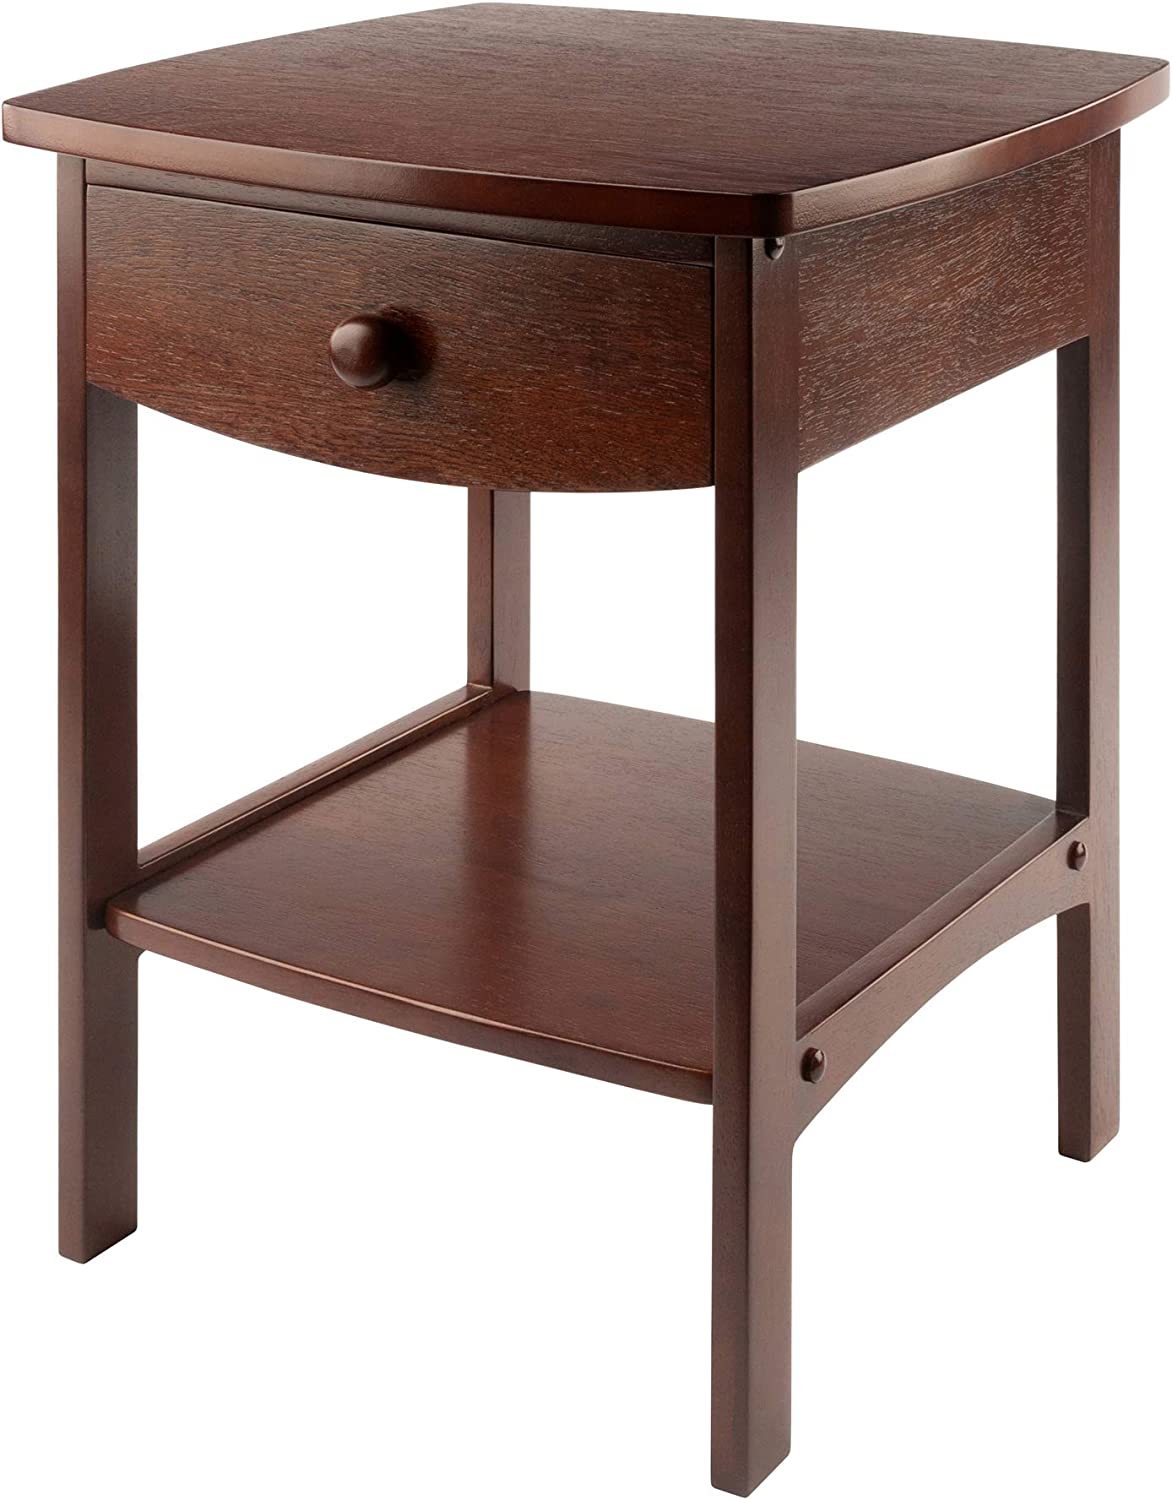 Walnut Winsome Wood Claire Accent Table - $64.99